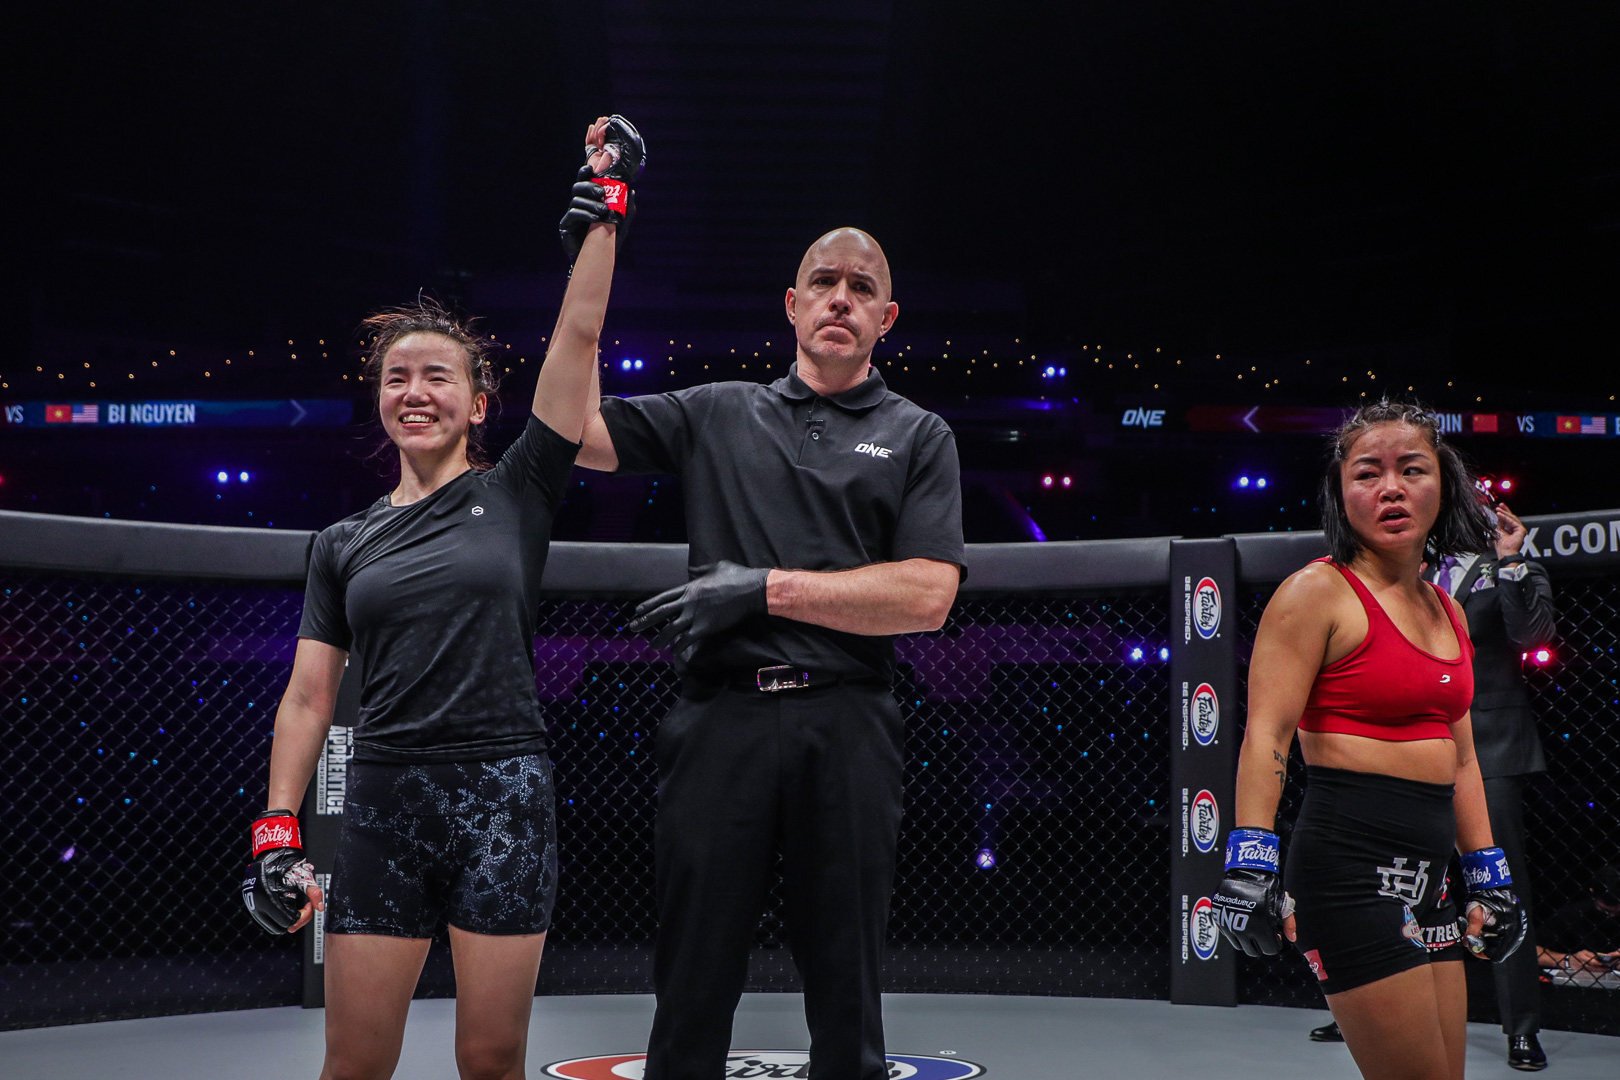 Lin Heqin wins a unanimous decision against Bi Nguyen at ONE: Bad Blood.
Photo: ONE Championship